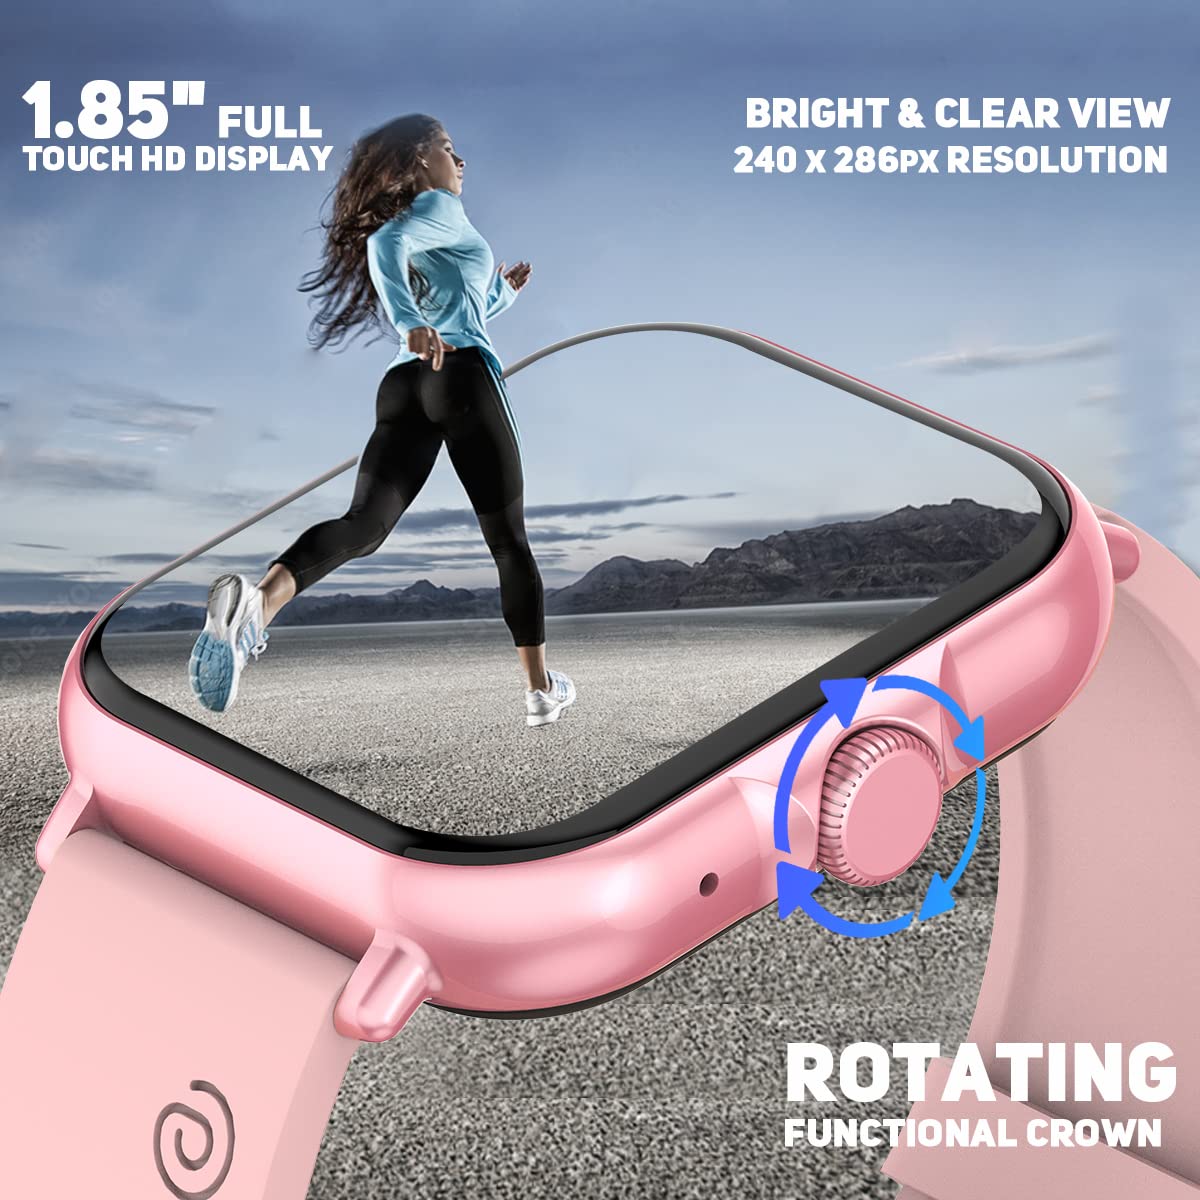 PTron Force X12N 1.85" Full Touch HD Display Bluetooth Calling Smartwatch, Functional Crown, 580 NITS Brightness, HR, SpO2, Watch Faces, Inbuilt Games, 5 Days Battery Life & IP68 Waterproof (Pink)